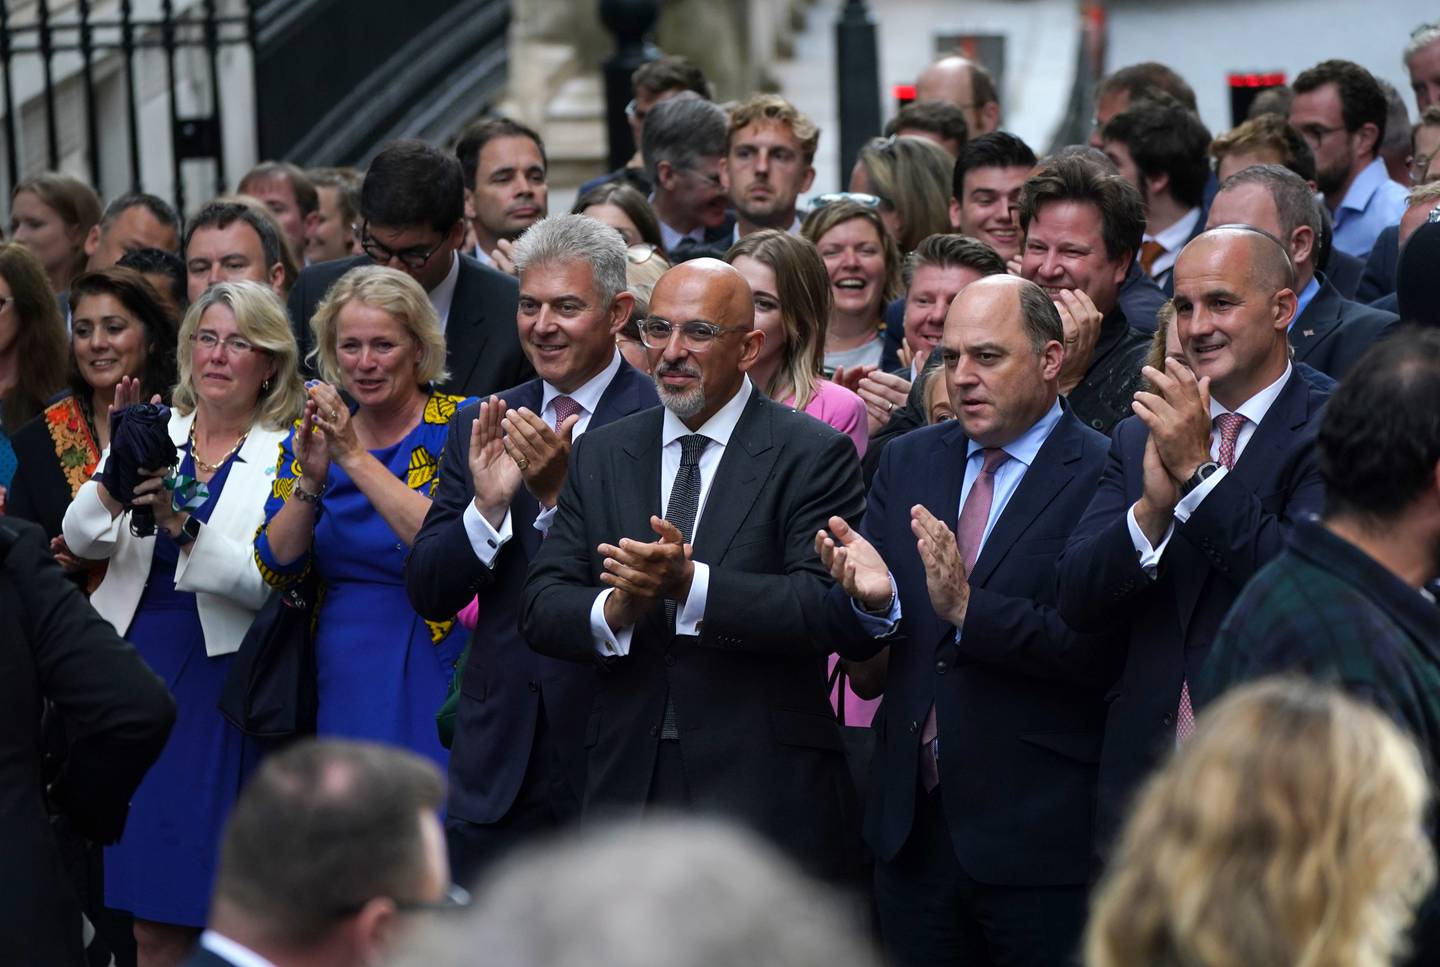 Secretary of State for Northern Ireland Brandon Lewis, centre left, Nadhim Zahawi, centre, and Defence Secretary Ben Wallace, centre right, clap after a speech by the new Prime Minister Liz Truss.